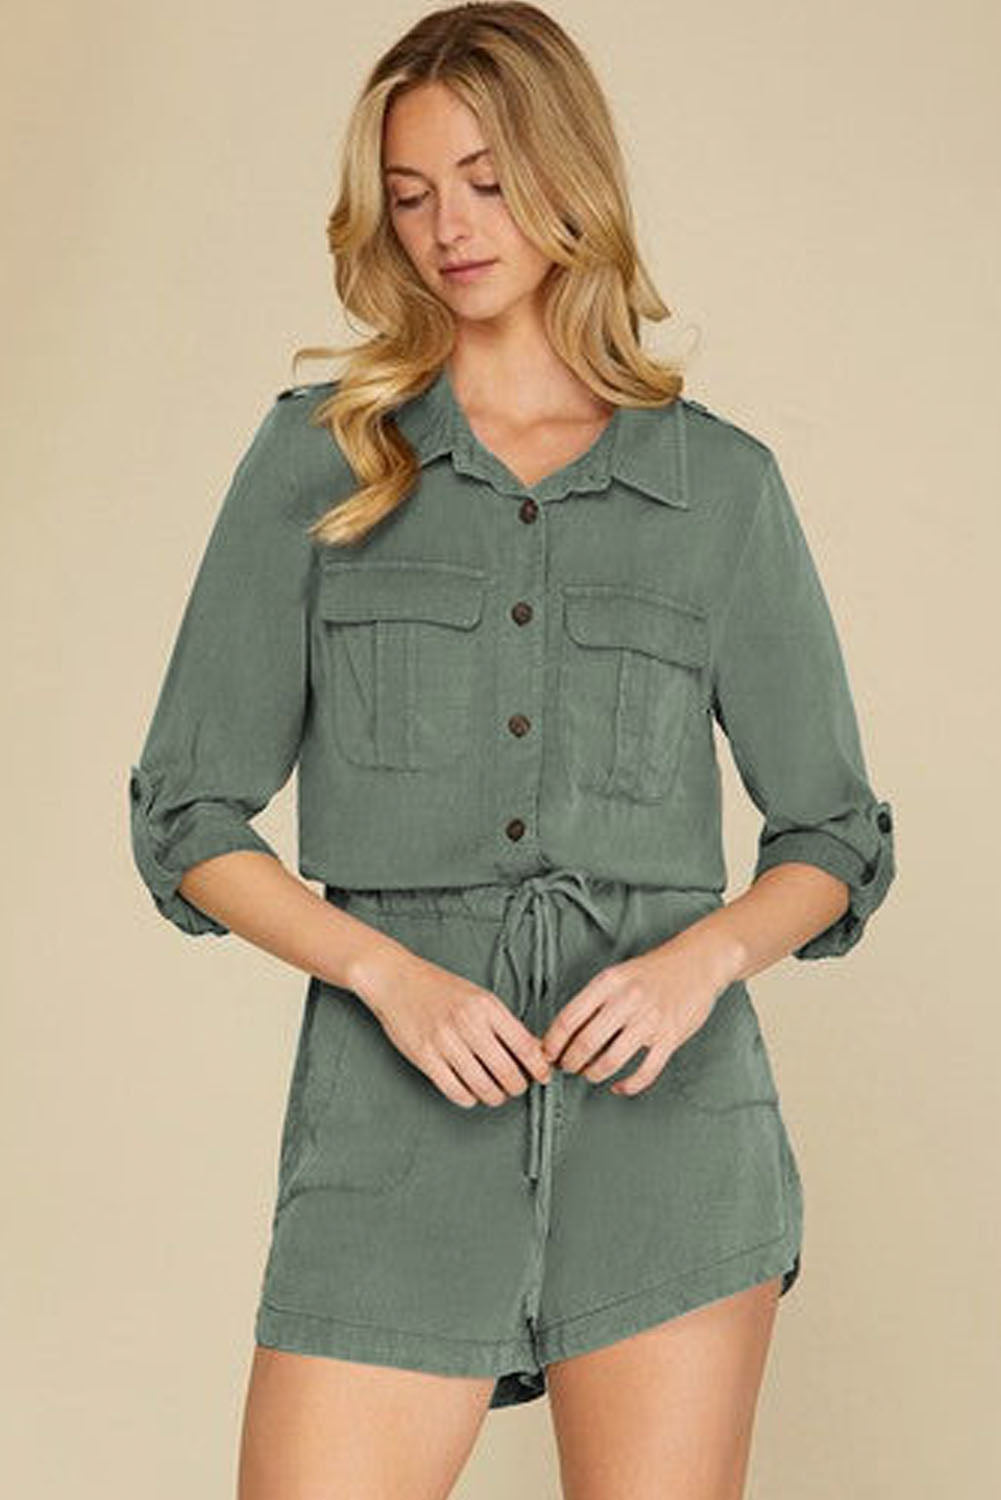 Pickle Green Roll up Sleeve Flap Pockets Drawstring Playsuit